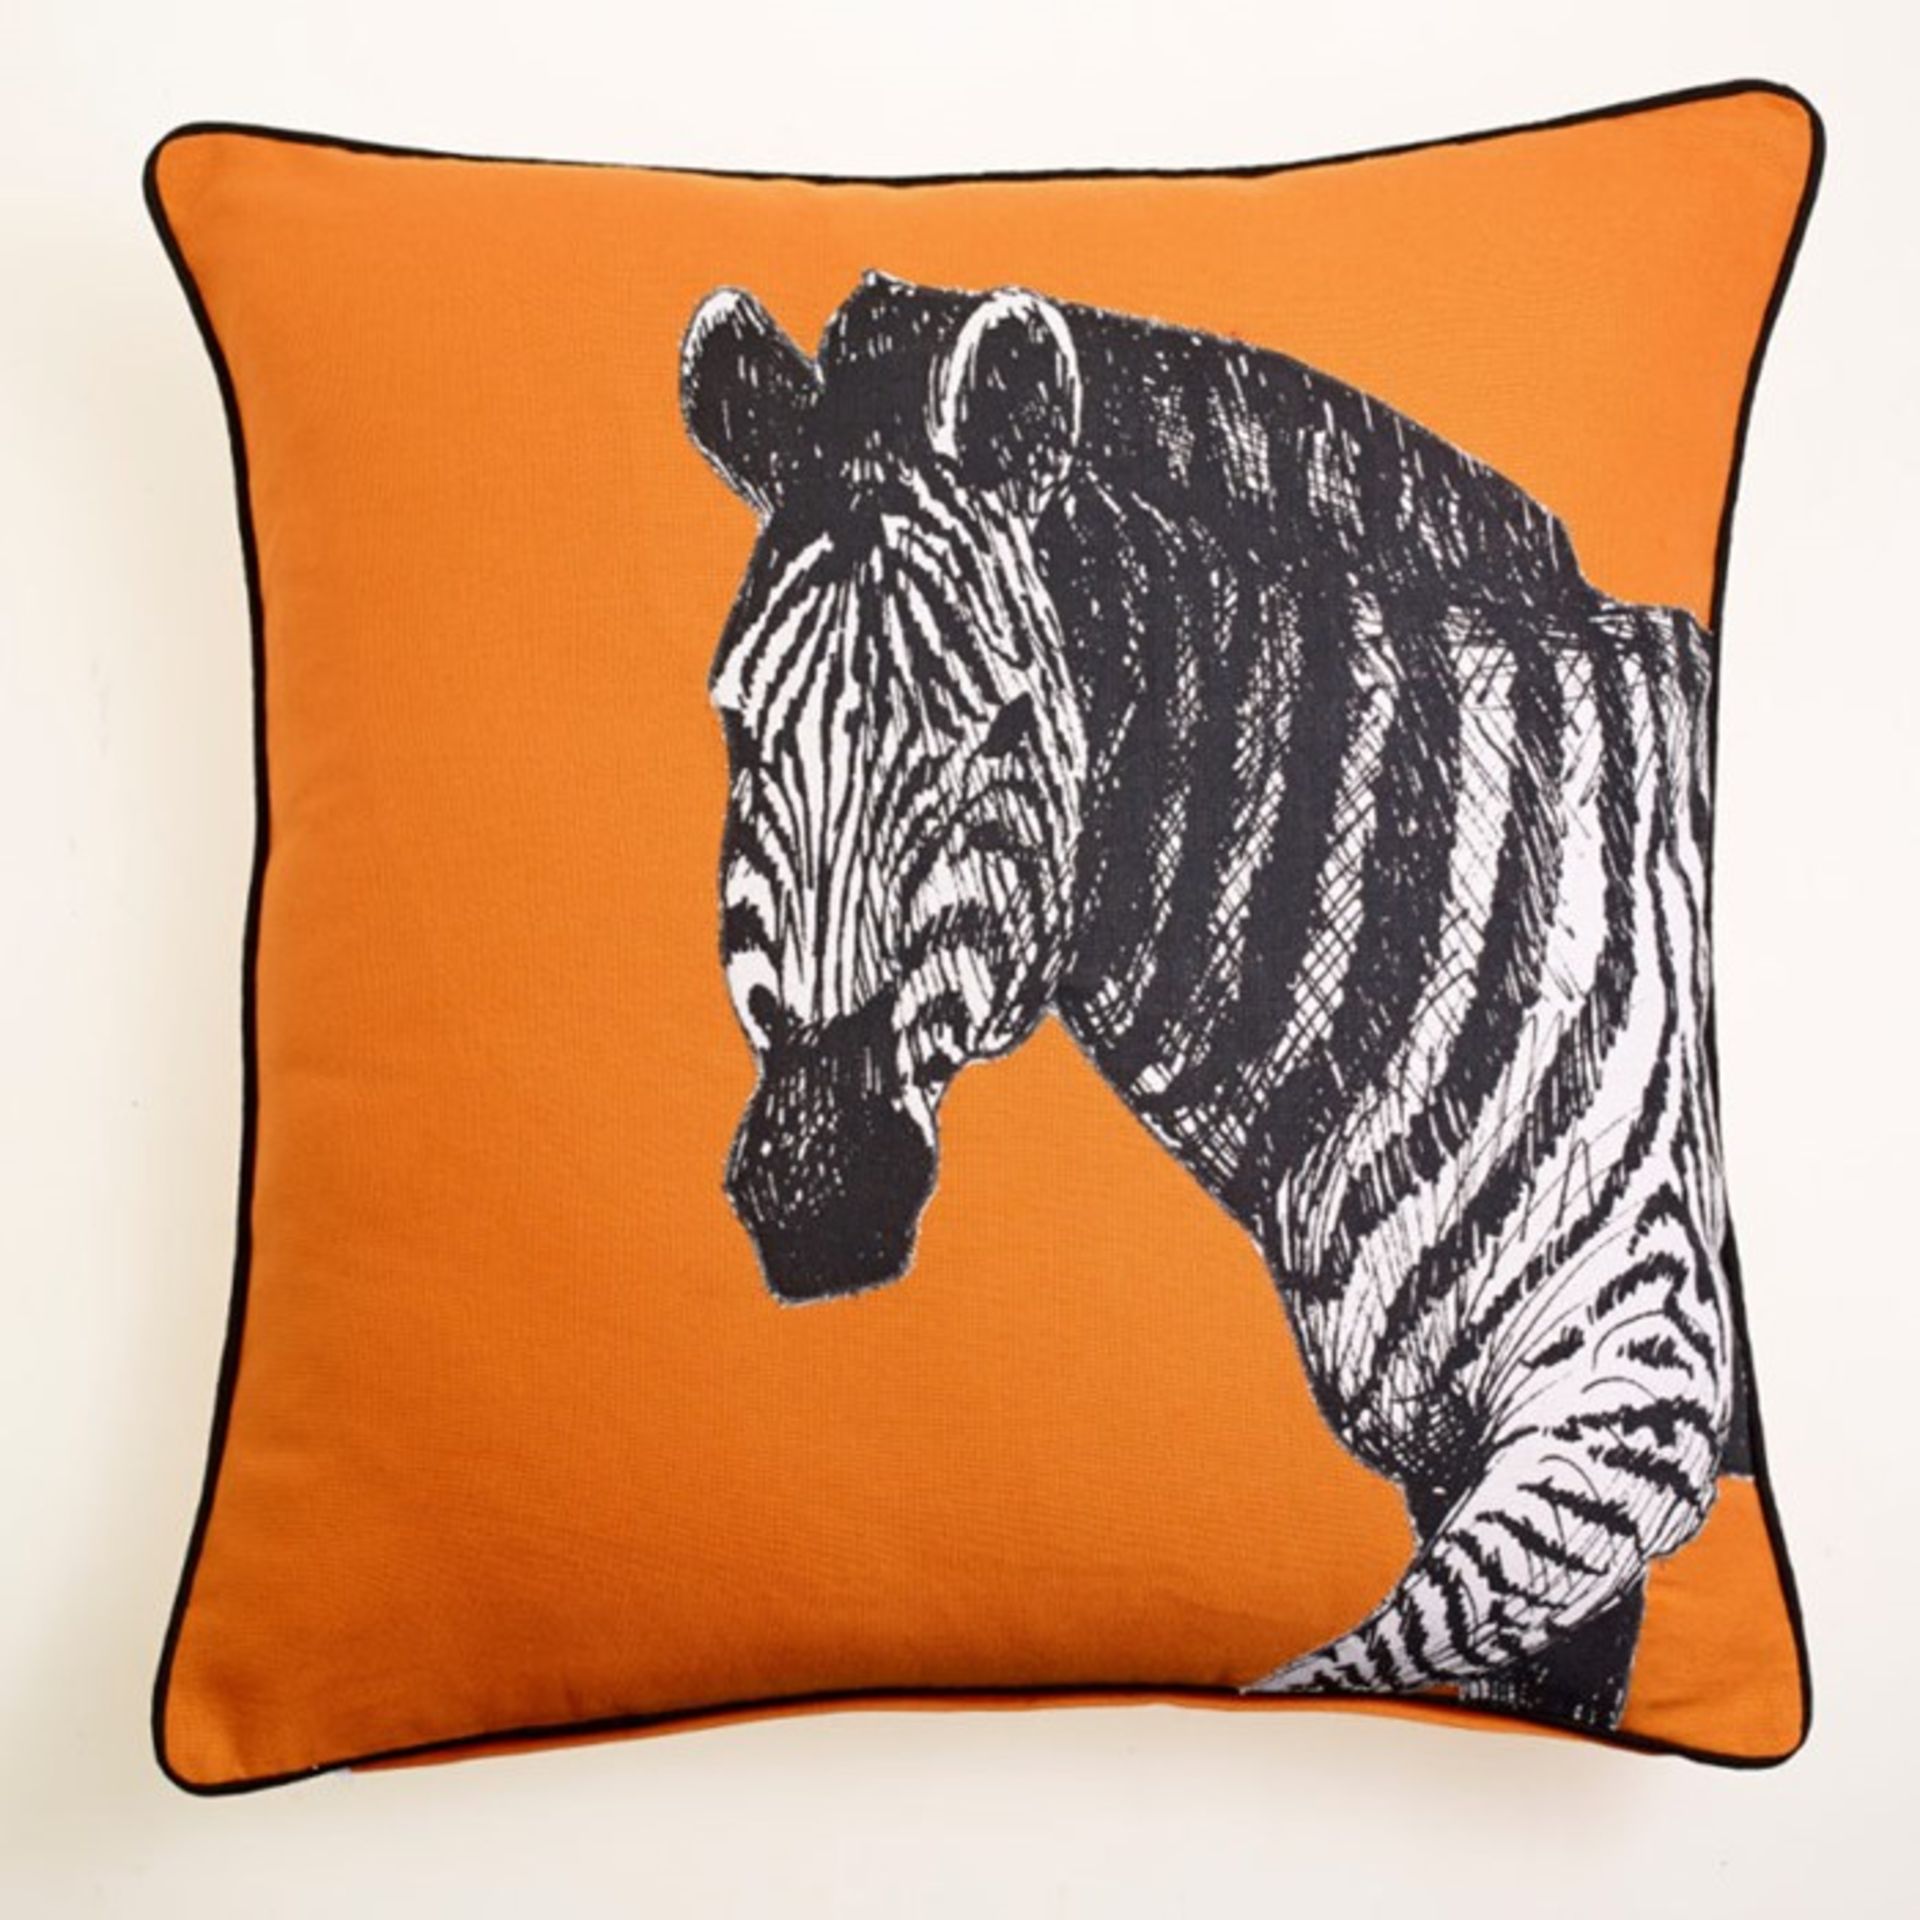 1 BRAND NEW PACKAGED ARTHOUSE ZEBRA ORANGE CUSHION 300118 (VIEWING HIGHLY RECOMMENDED)